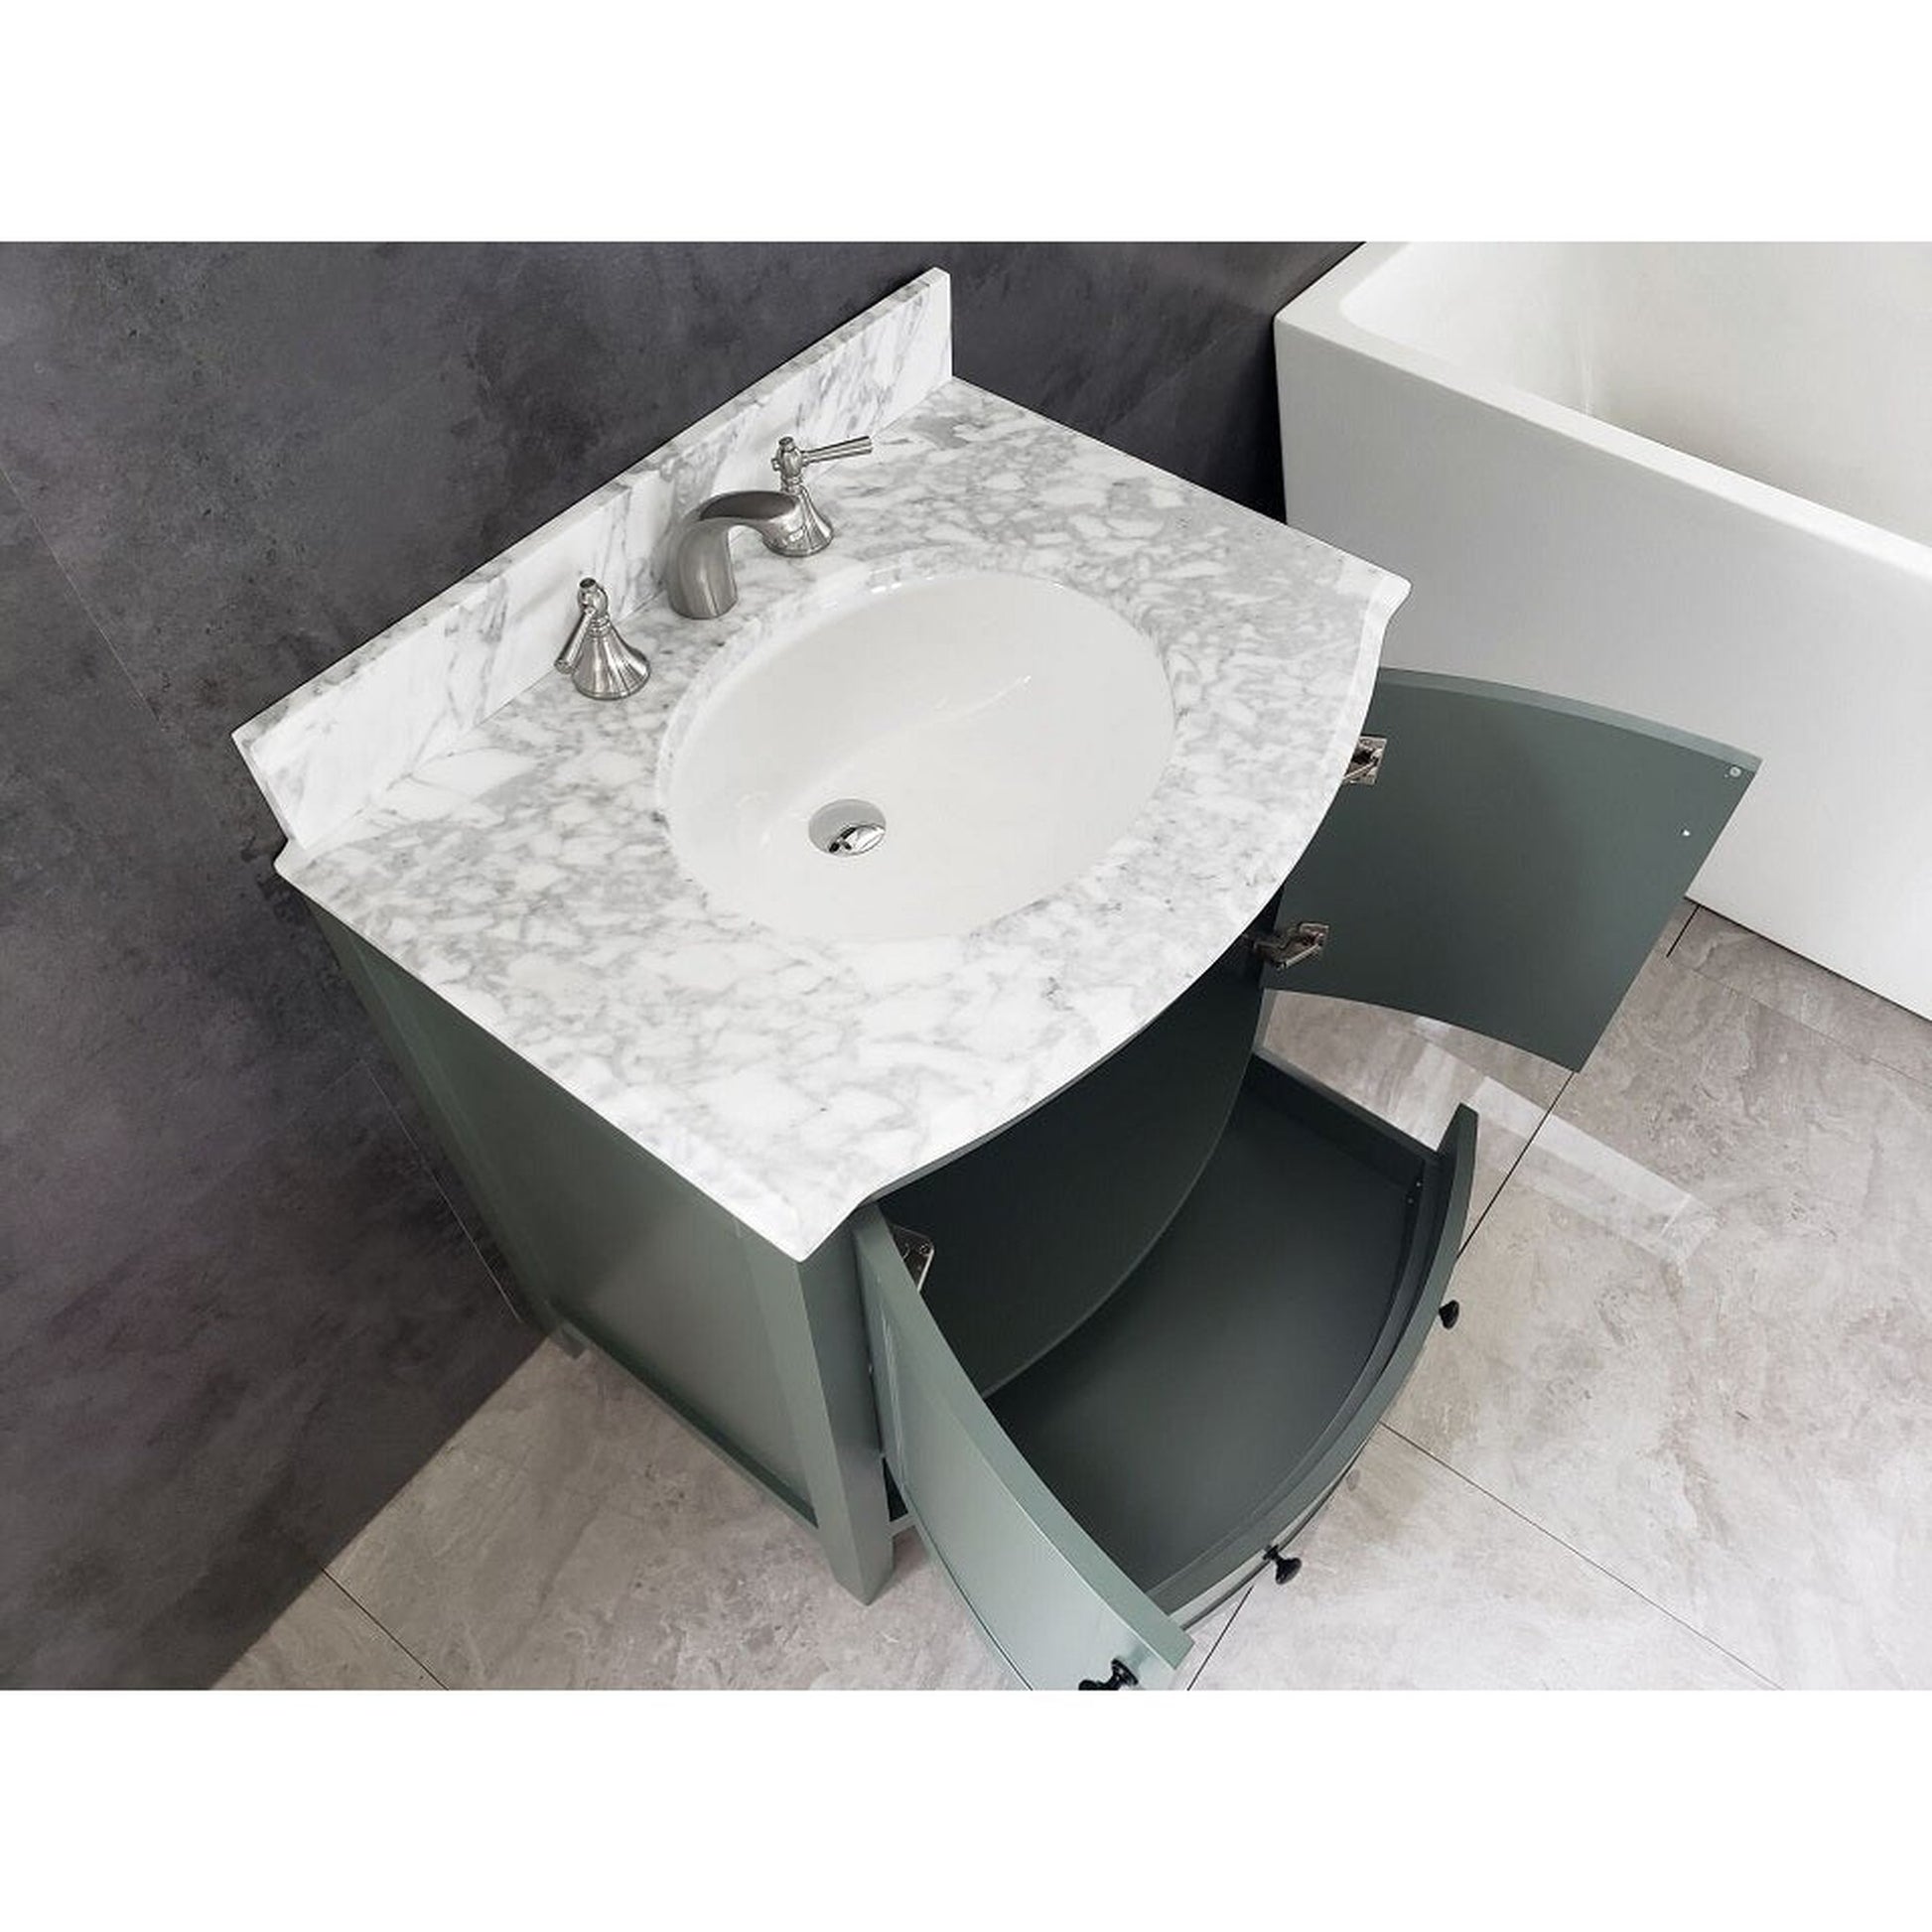 Legion Furniture WT9309 36" Pewter Green Freestanding PVC Vanity Cabinet With Marble Top and White Ceramic Sink